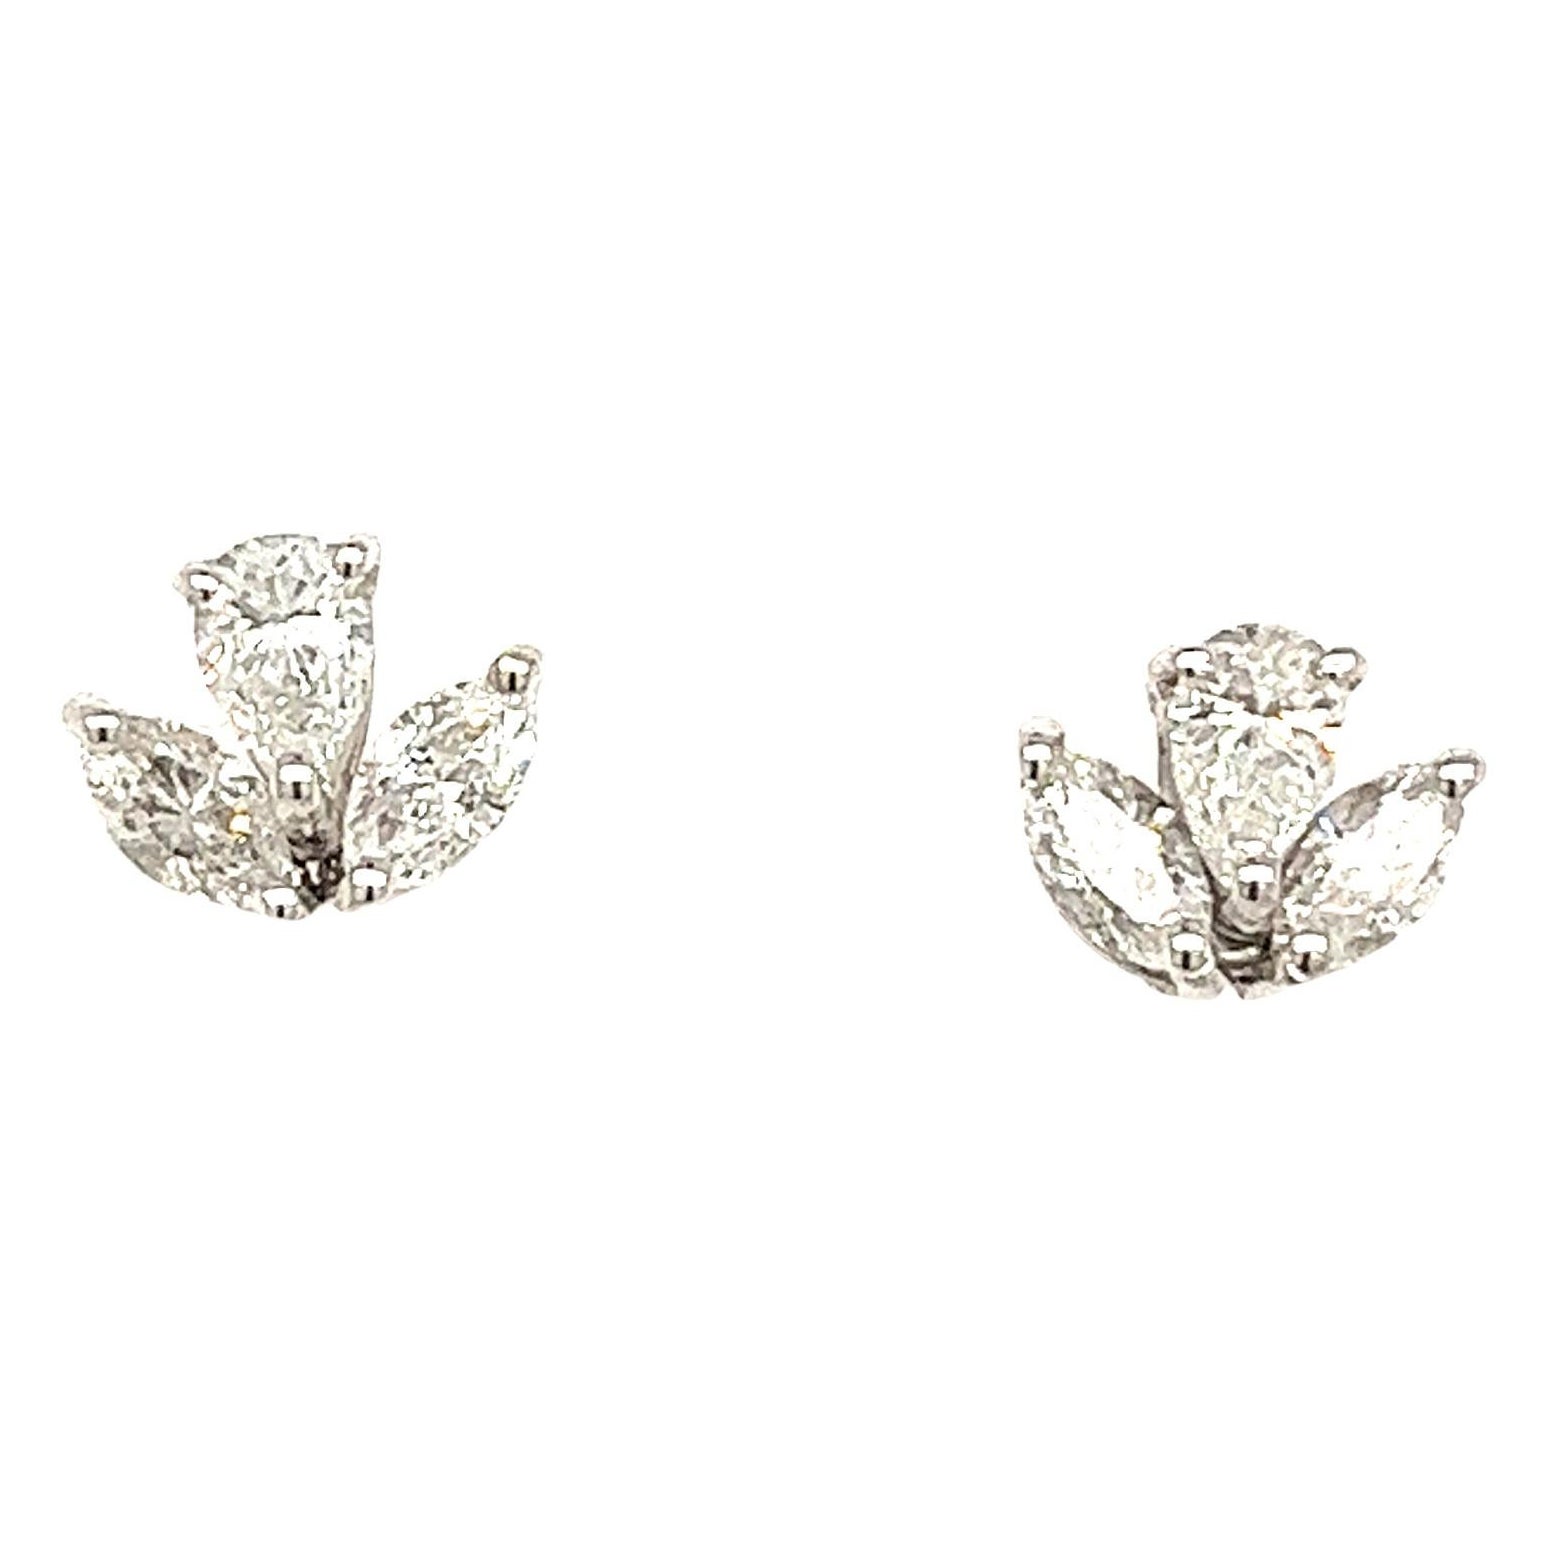 18ct White Gold Diamond Stud Earrings Set With 0.80ct Marquise & Pear Diamonds